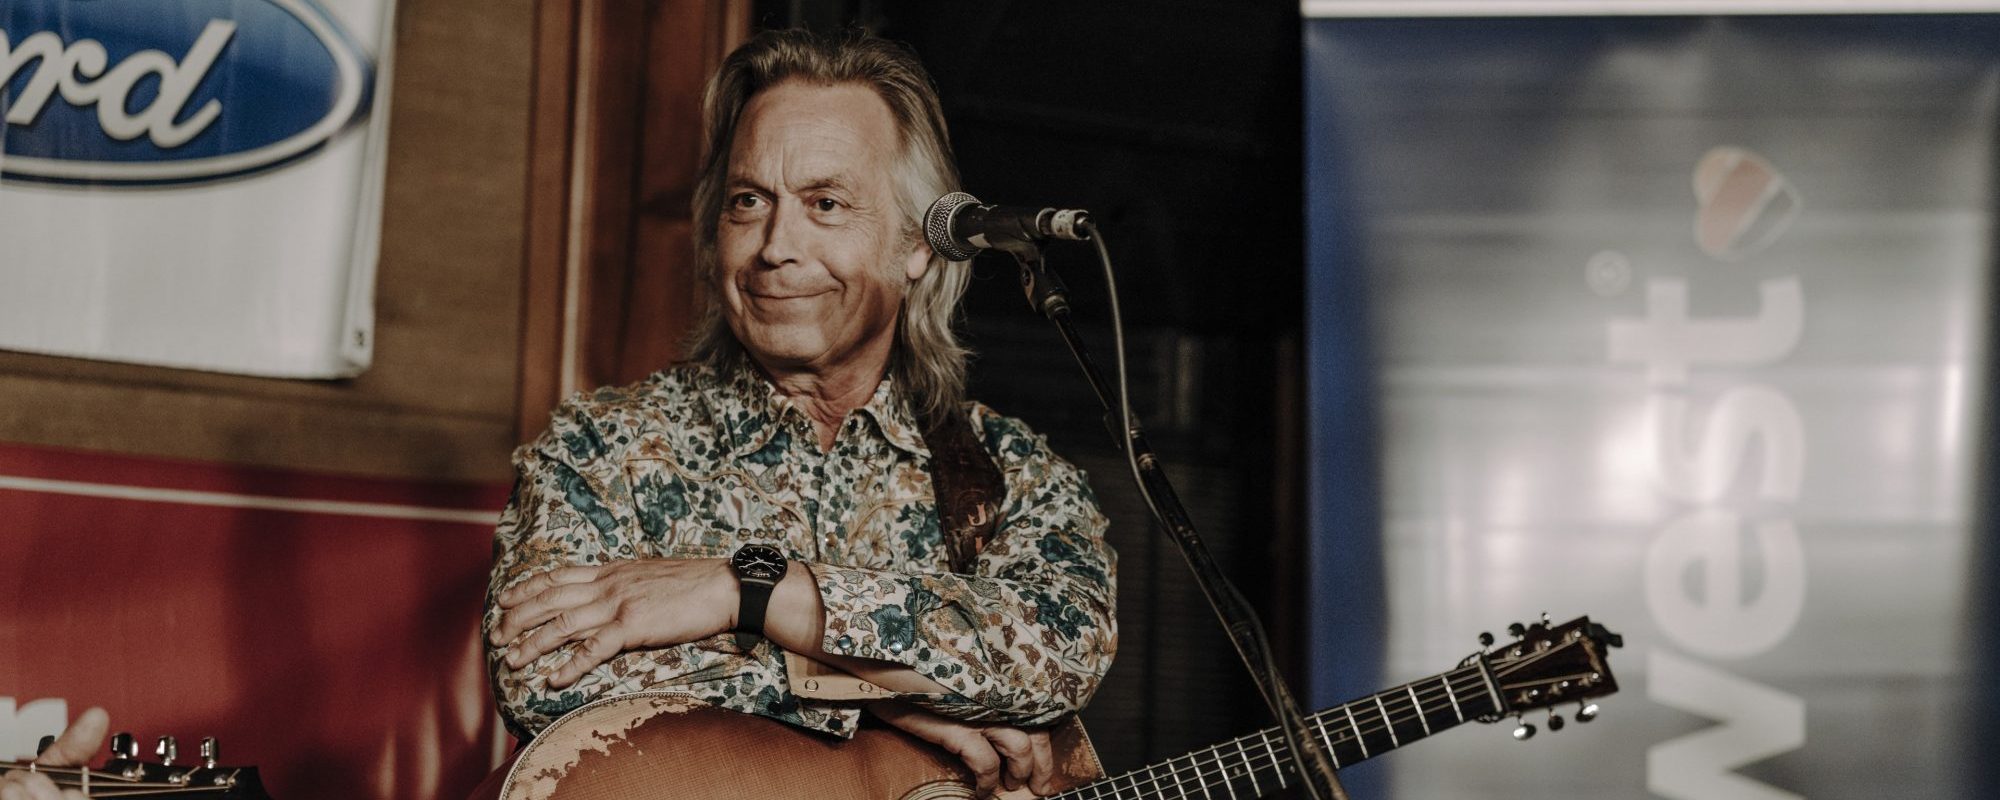 Off The Record: Jim Lauderdale Keeps The “Memory” Of Robert Hunter Alive On New Record, ‘Hope’